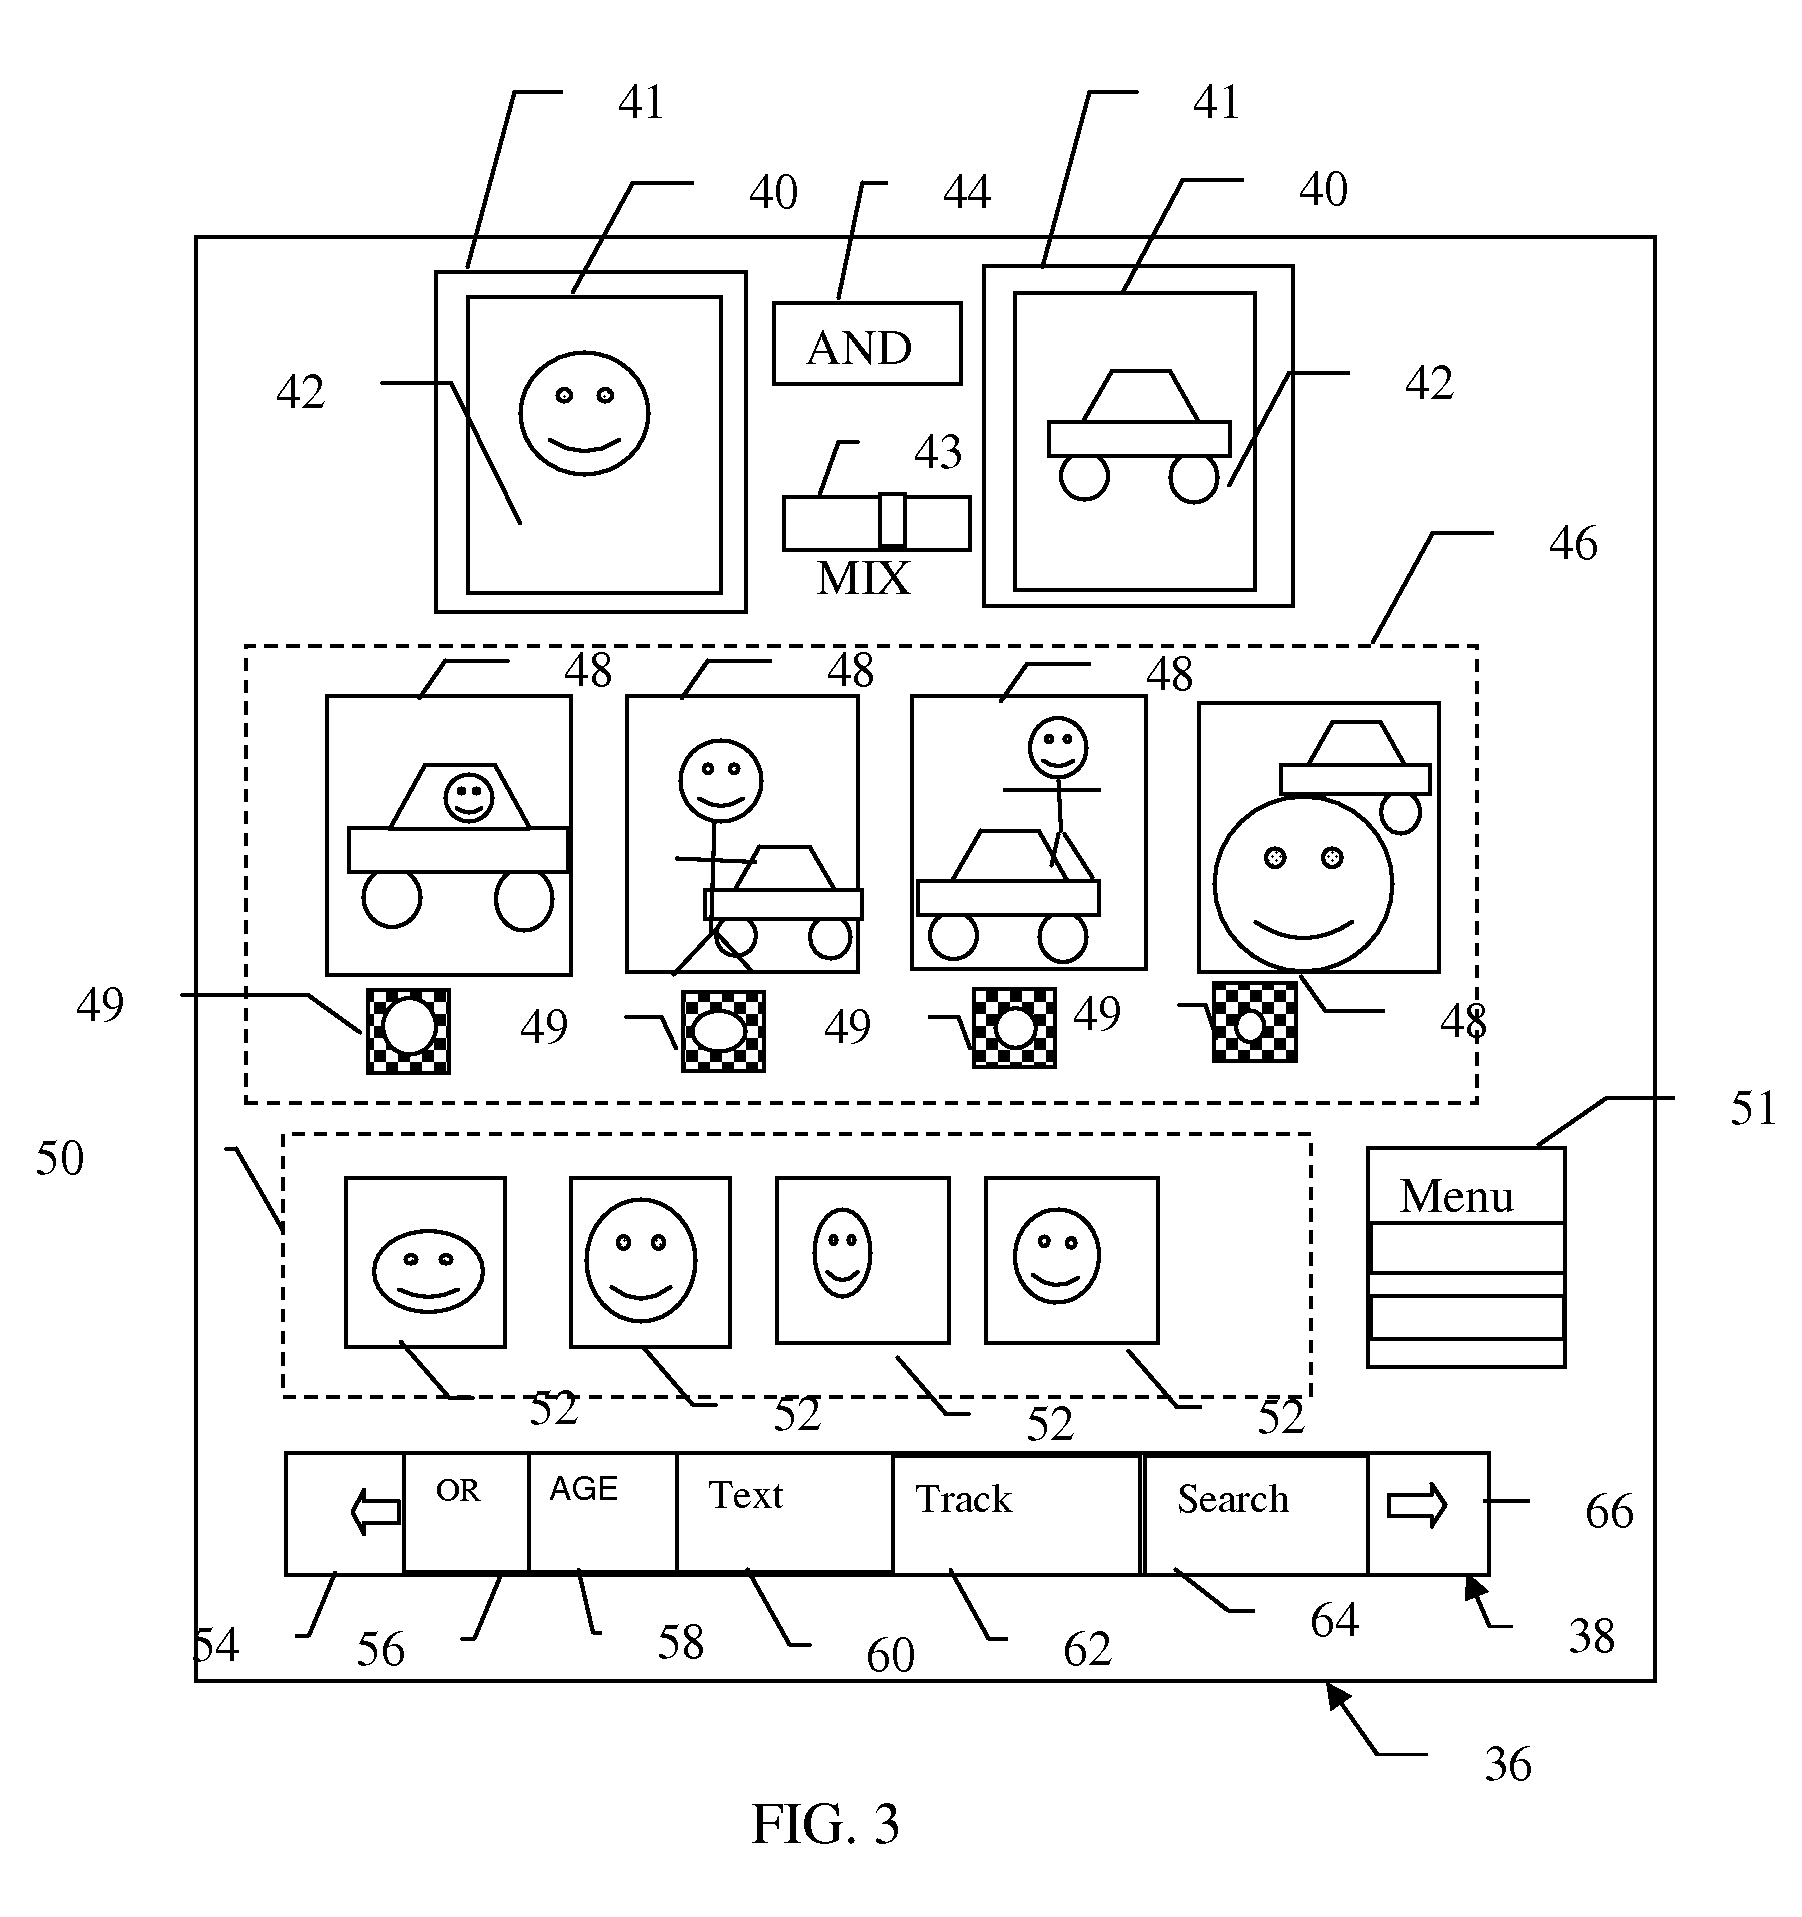 System and Method for Searching Multimedia using Exemplar Images